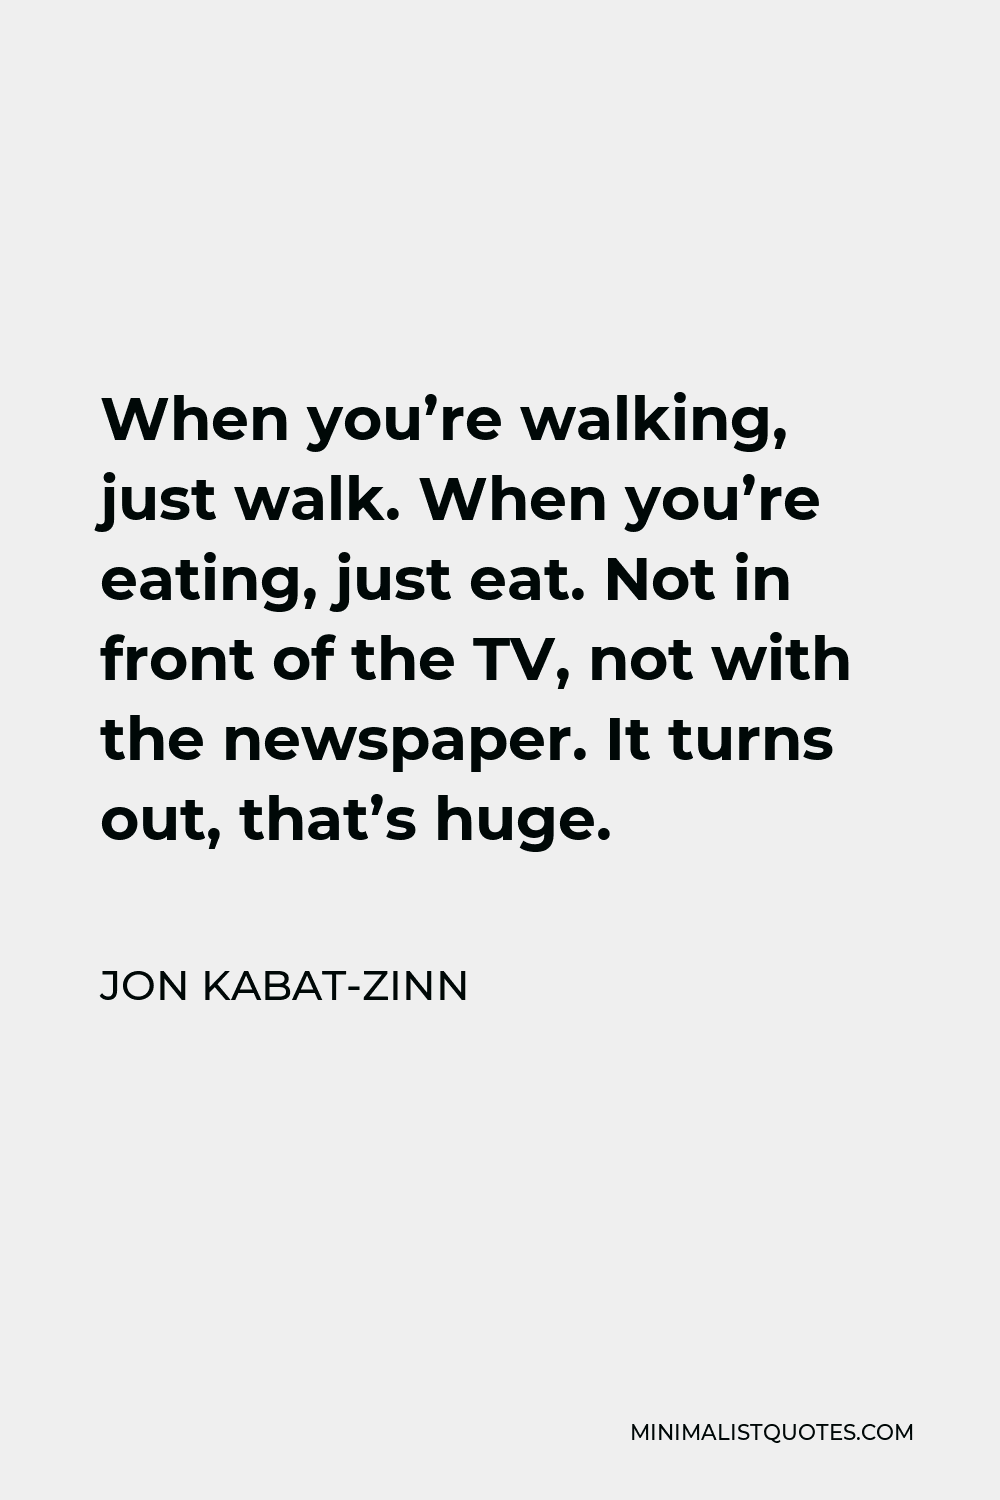 Jon Kabat-Zinn Quote - When you’re walking, just walk. When you’re eating, just eat. Not in front of the TV, not with the newspaper. It turns out, that’s huge.